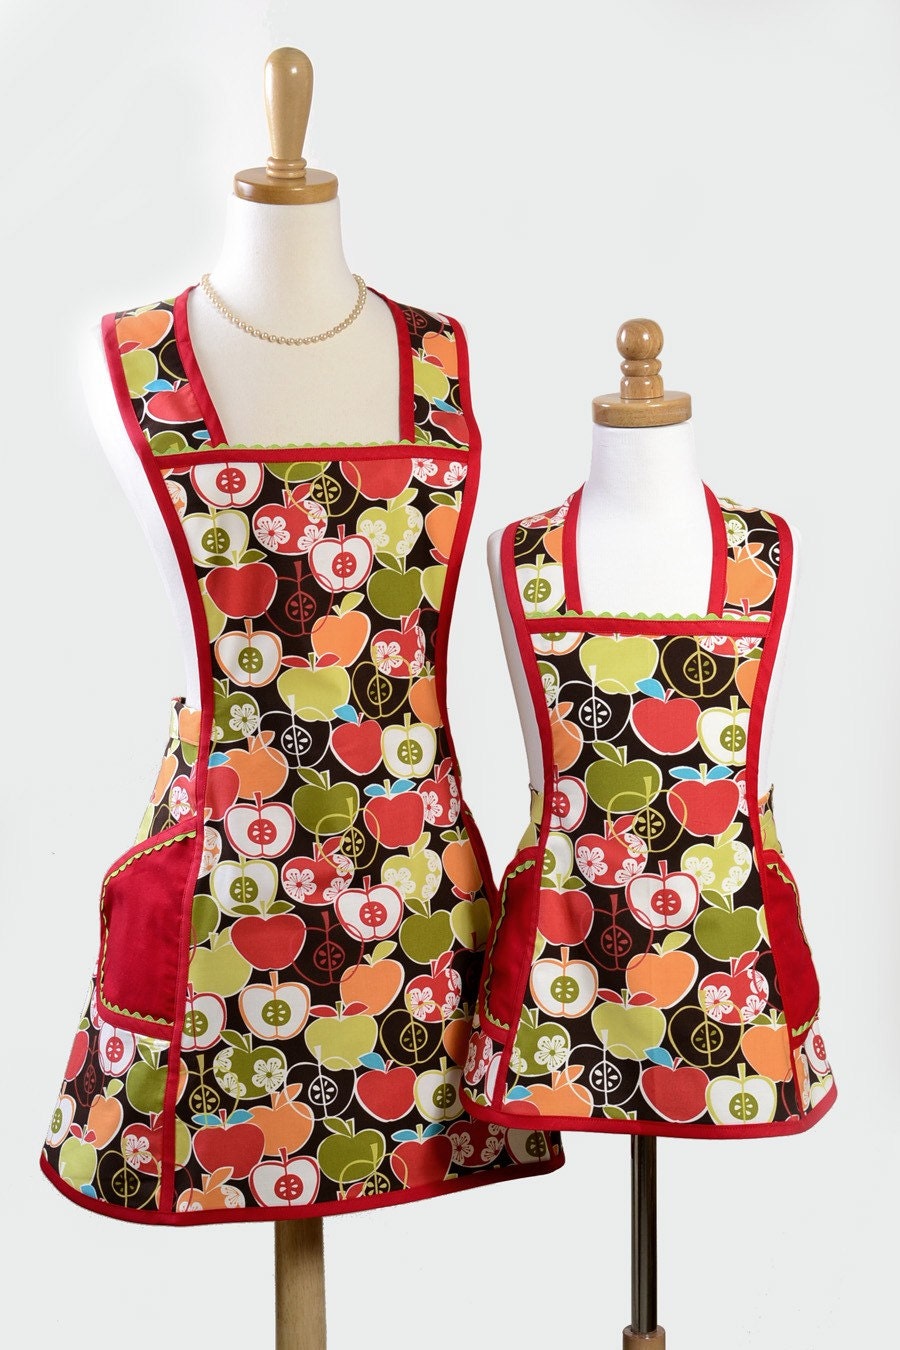 Mother Daughter Aprons :  Vintage Inspired Aprons in  Mother Daughter Set - Bite Me Apples in Autumn Harvest Colors